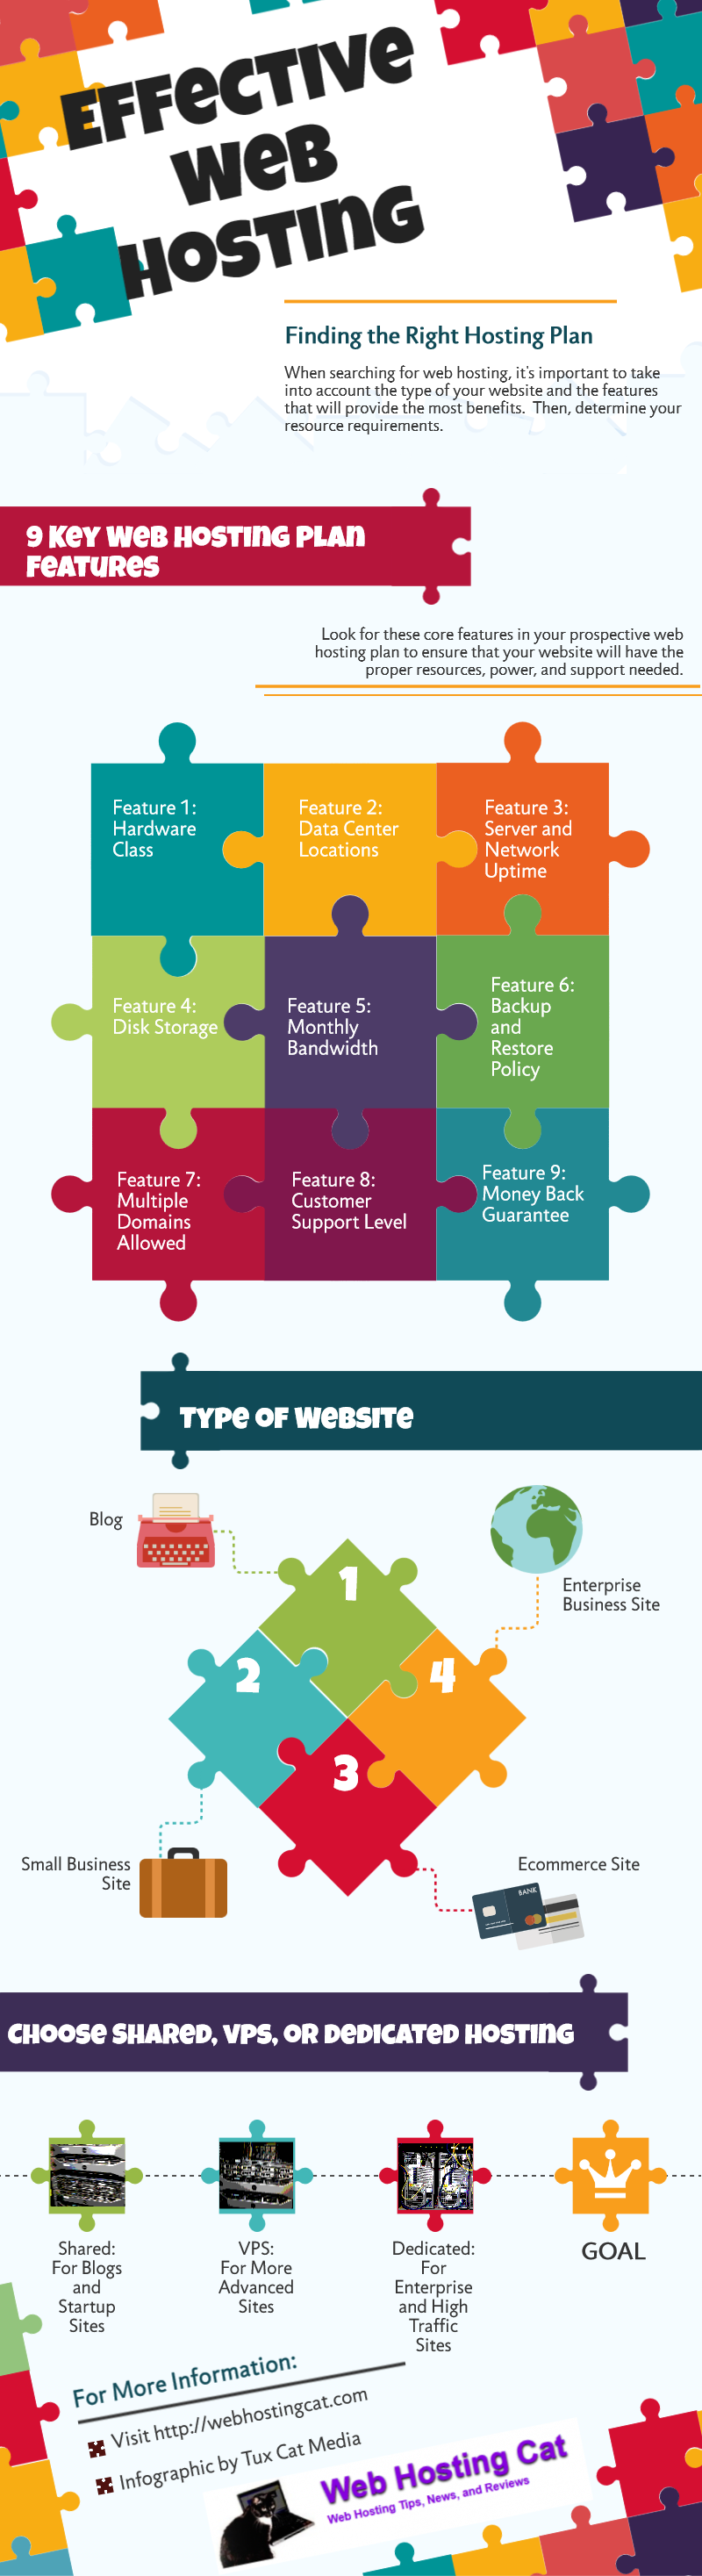 Effective Web Hosting Infographic